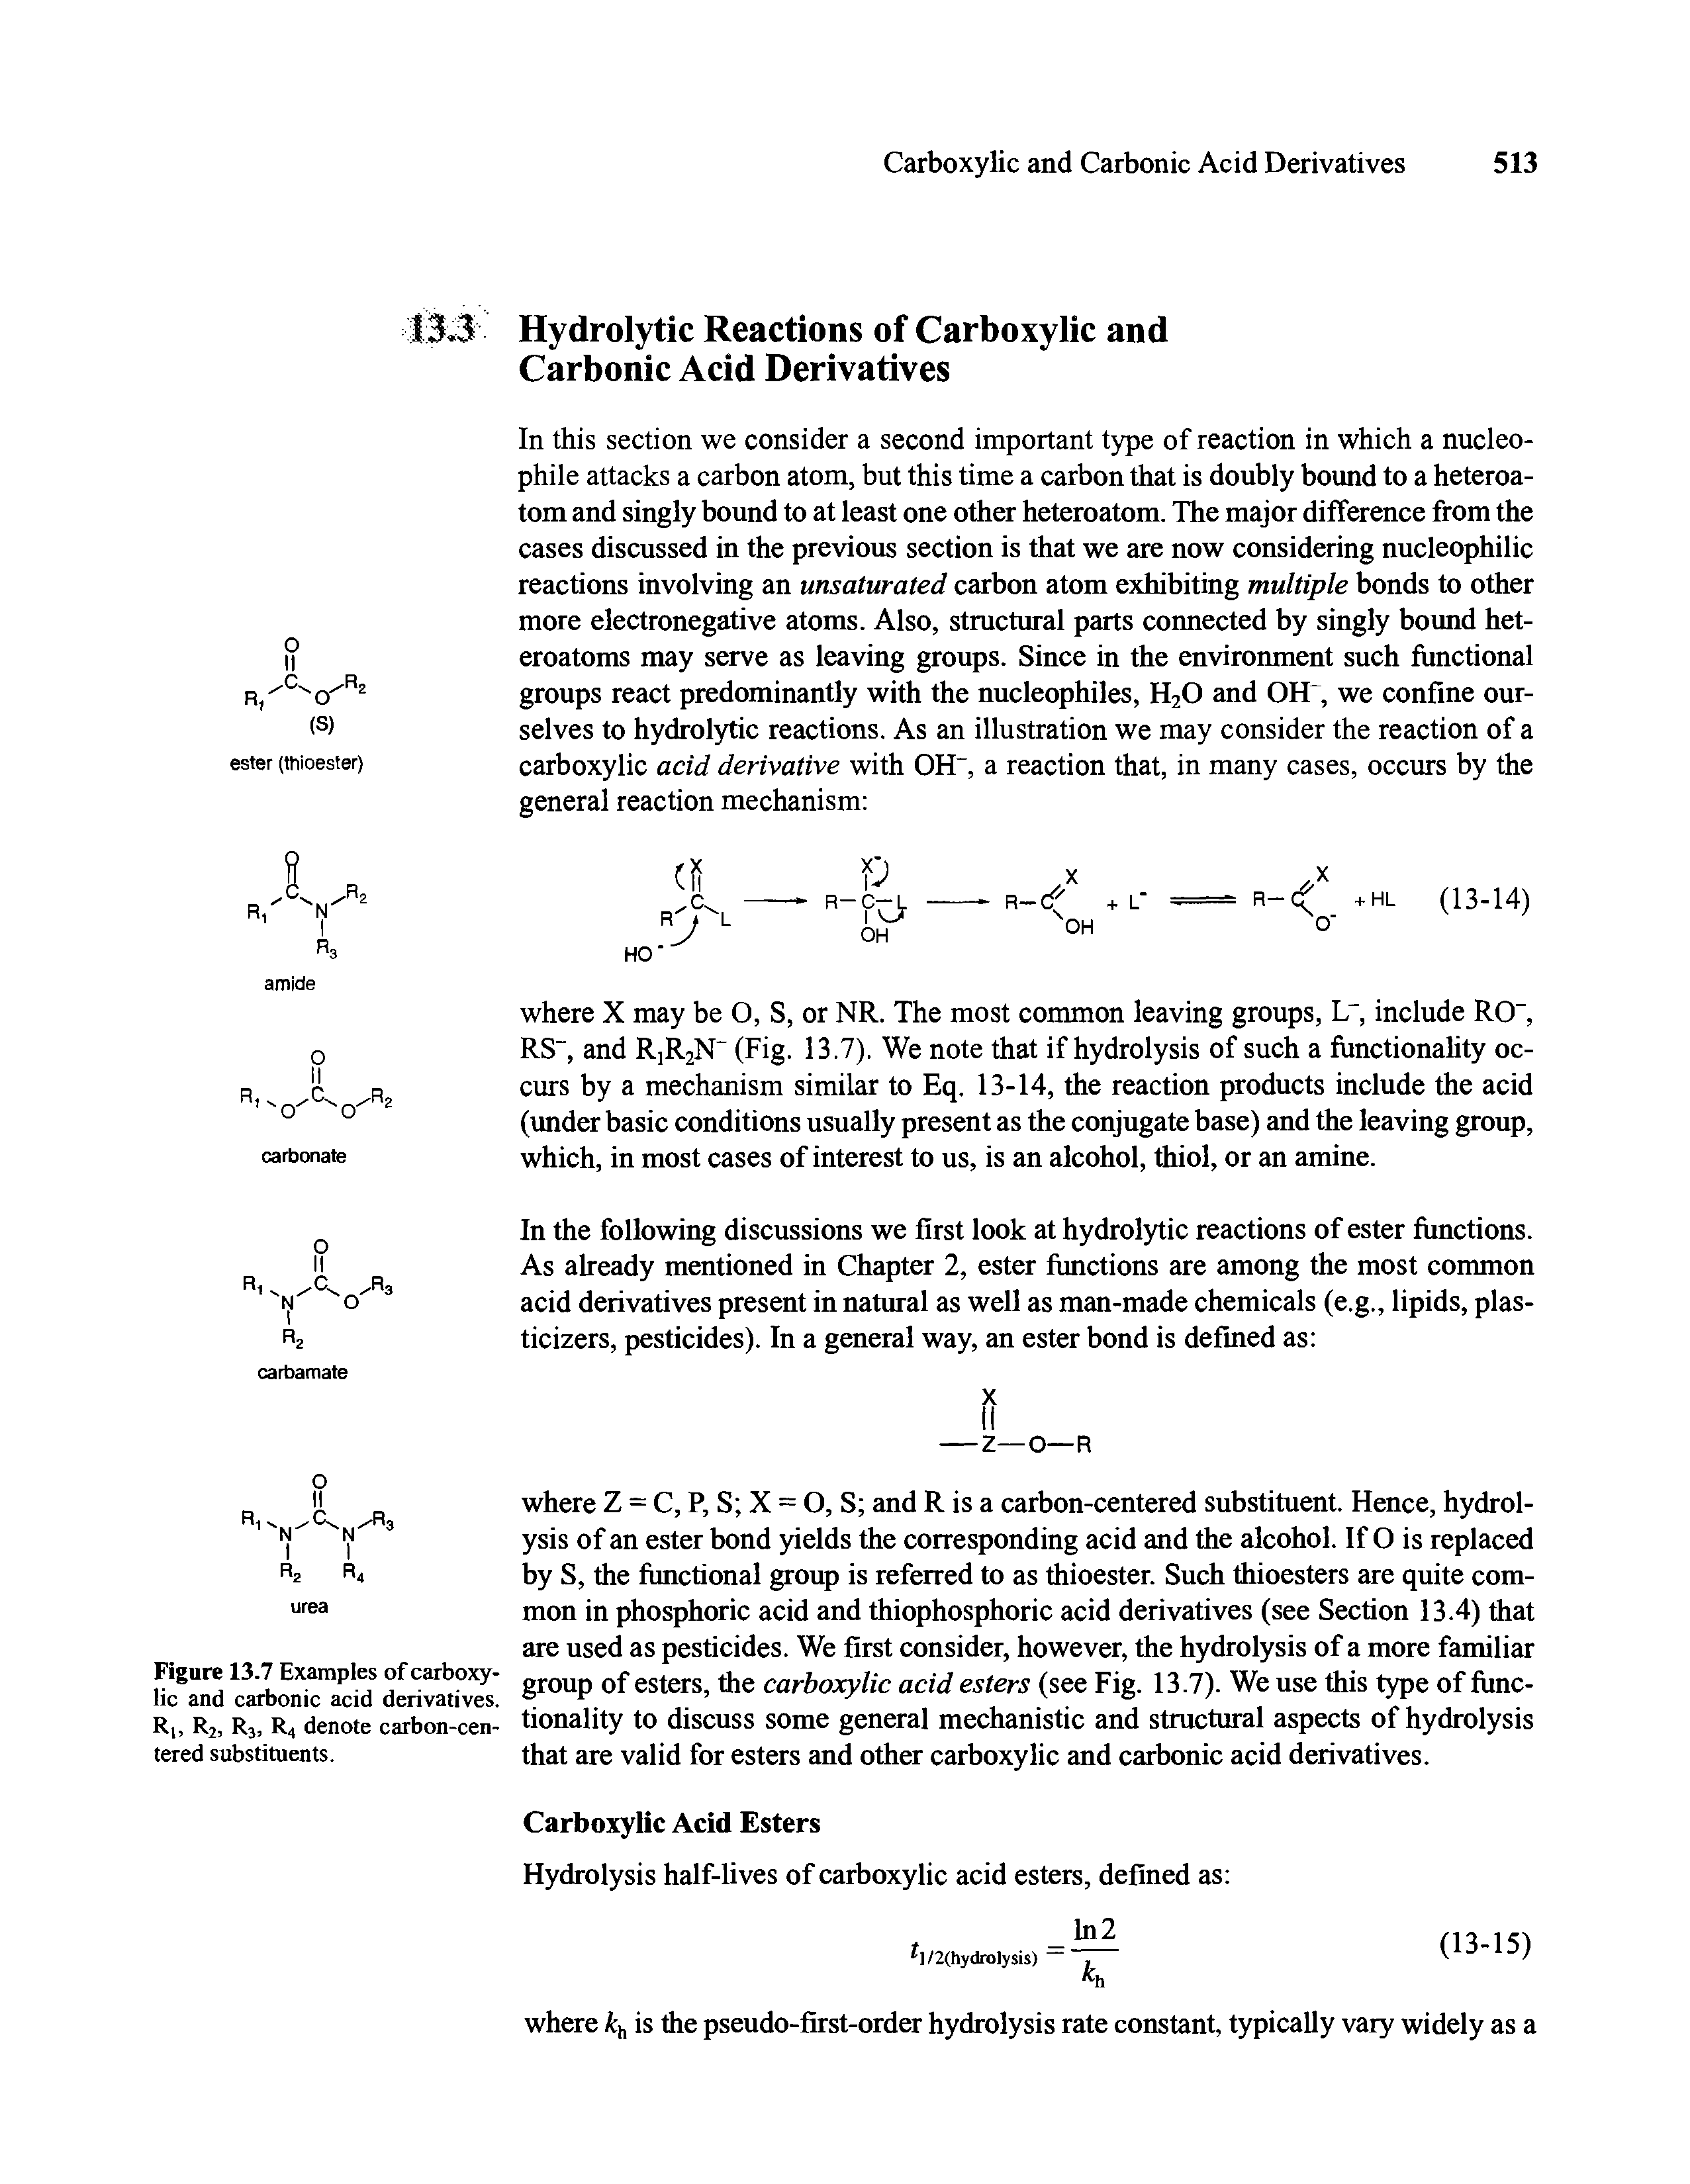 Figure 13.7 Examples of carboxylic and carbonic acid derivatives. Ri, R2, R3i R4 denote carbon-centered substituents.